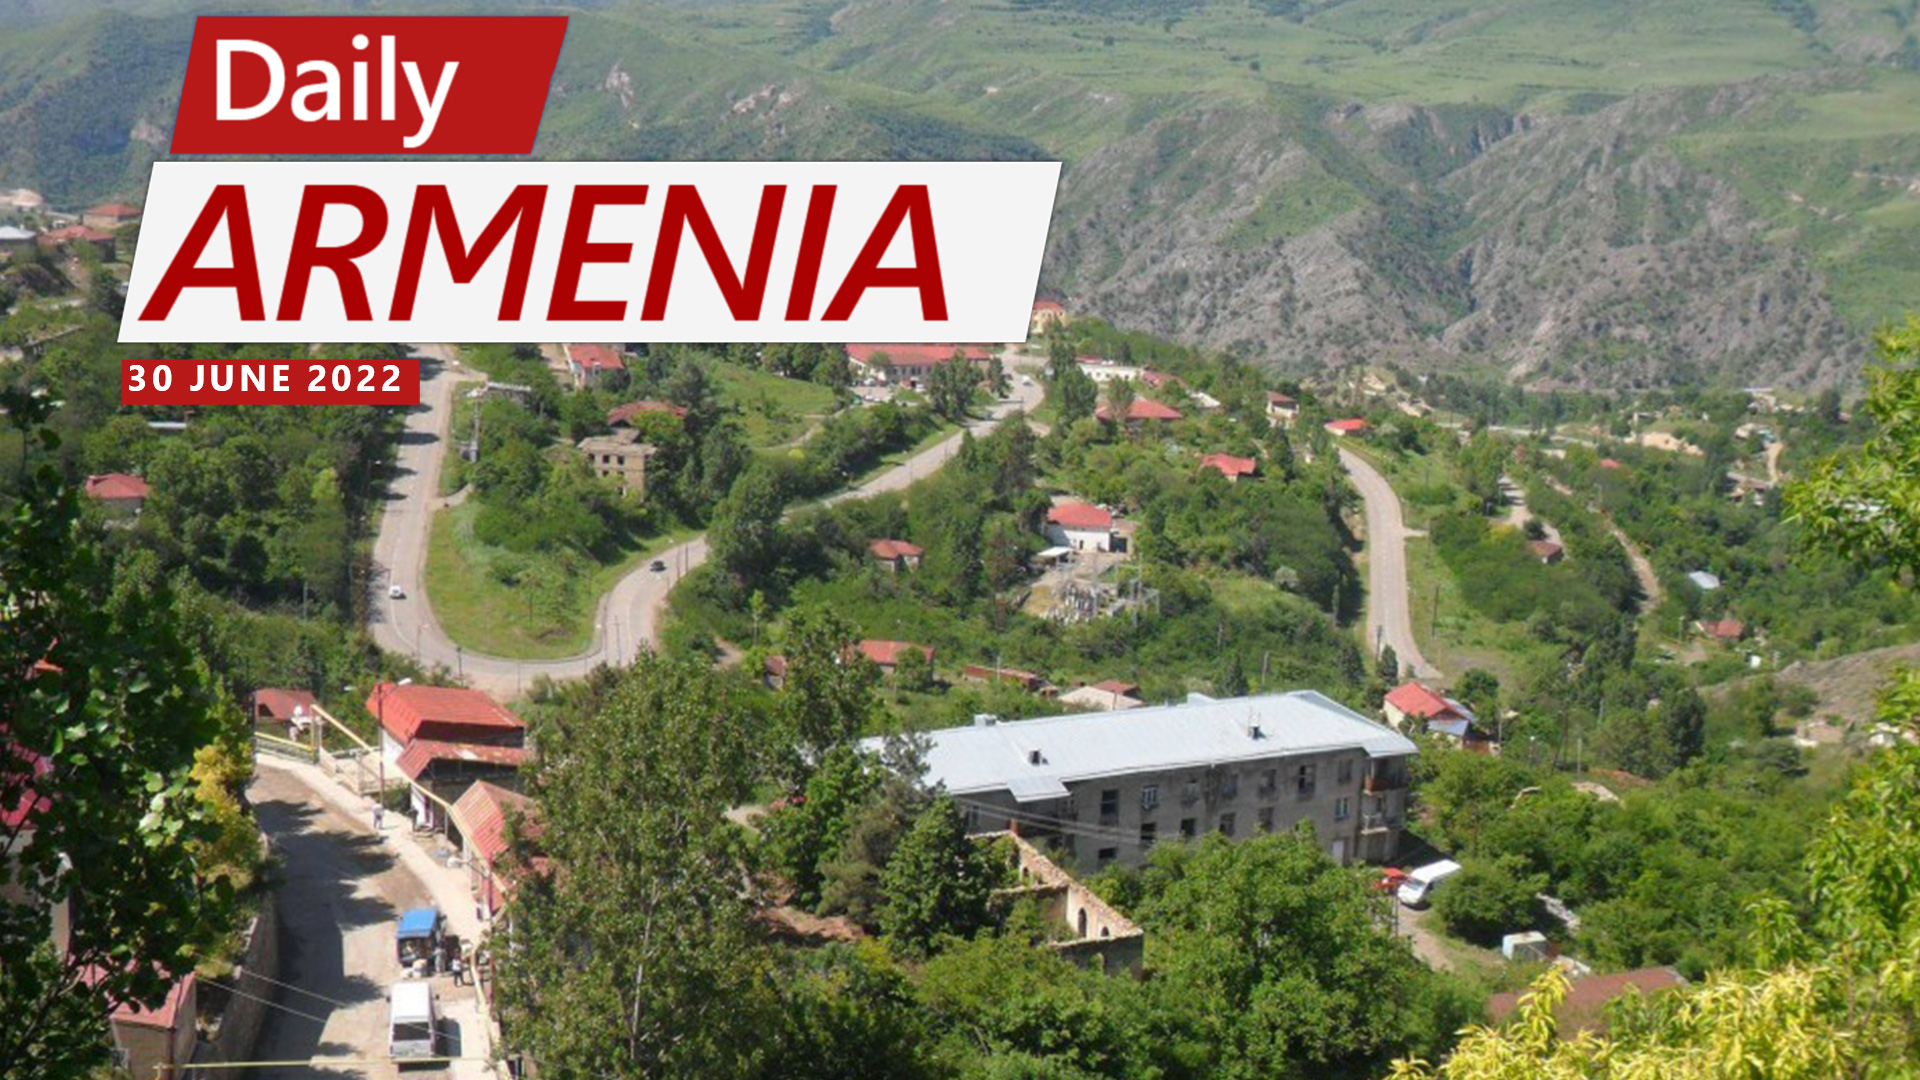 Berdzor will be handed to Azerbaijan in accordance with ceasefire statement